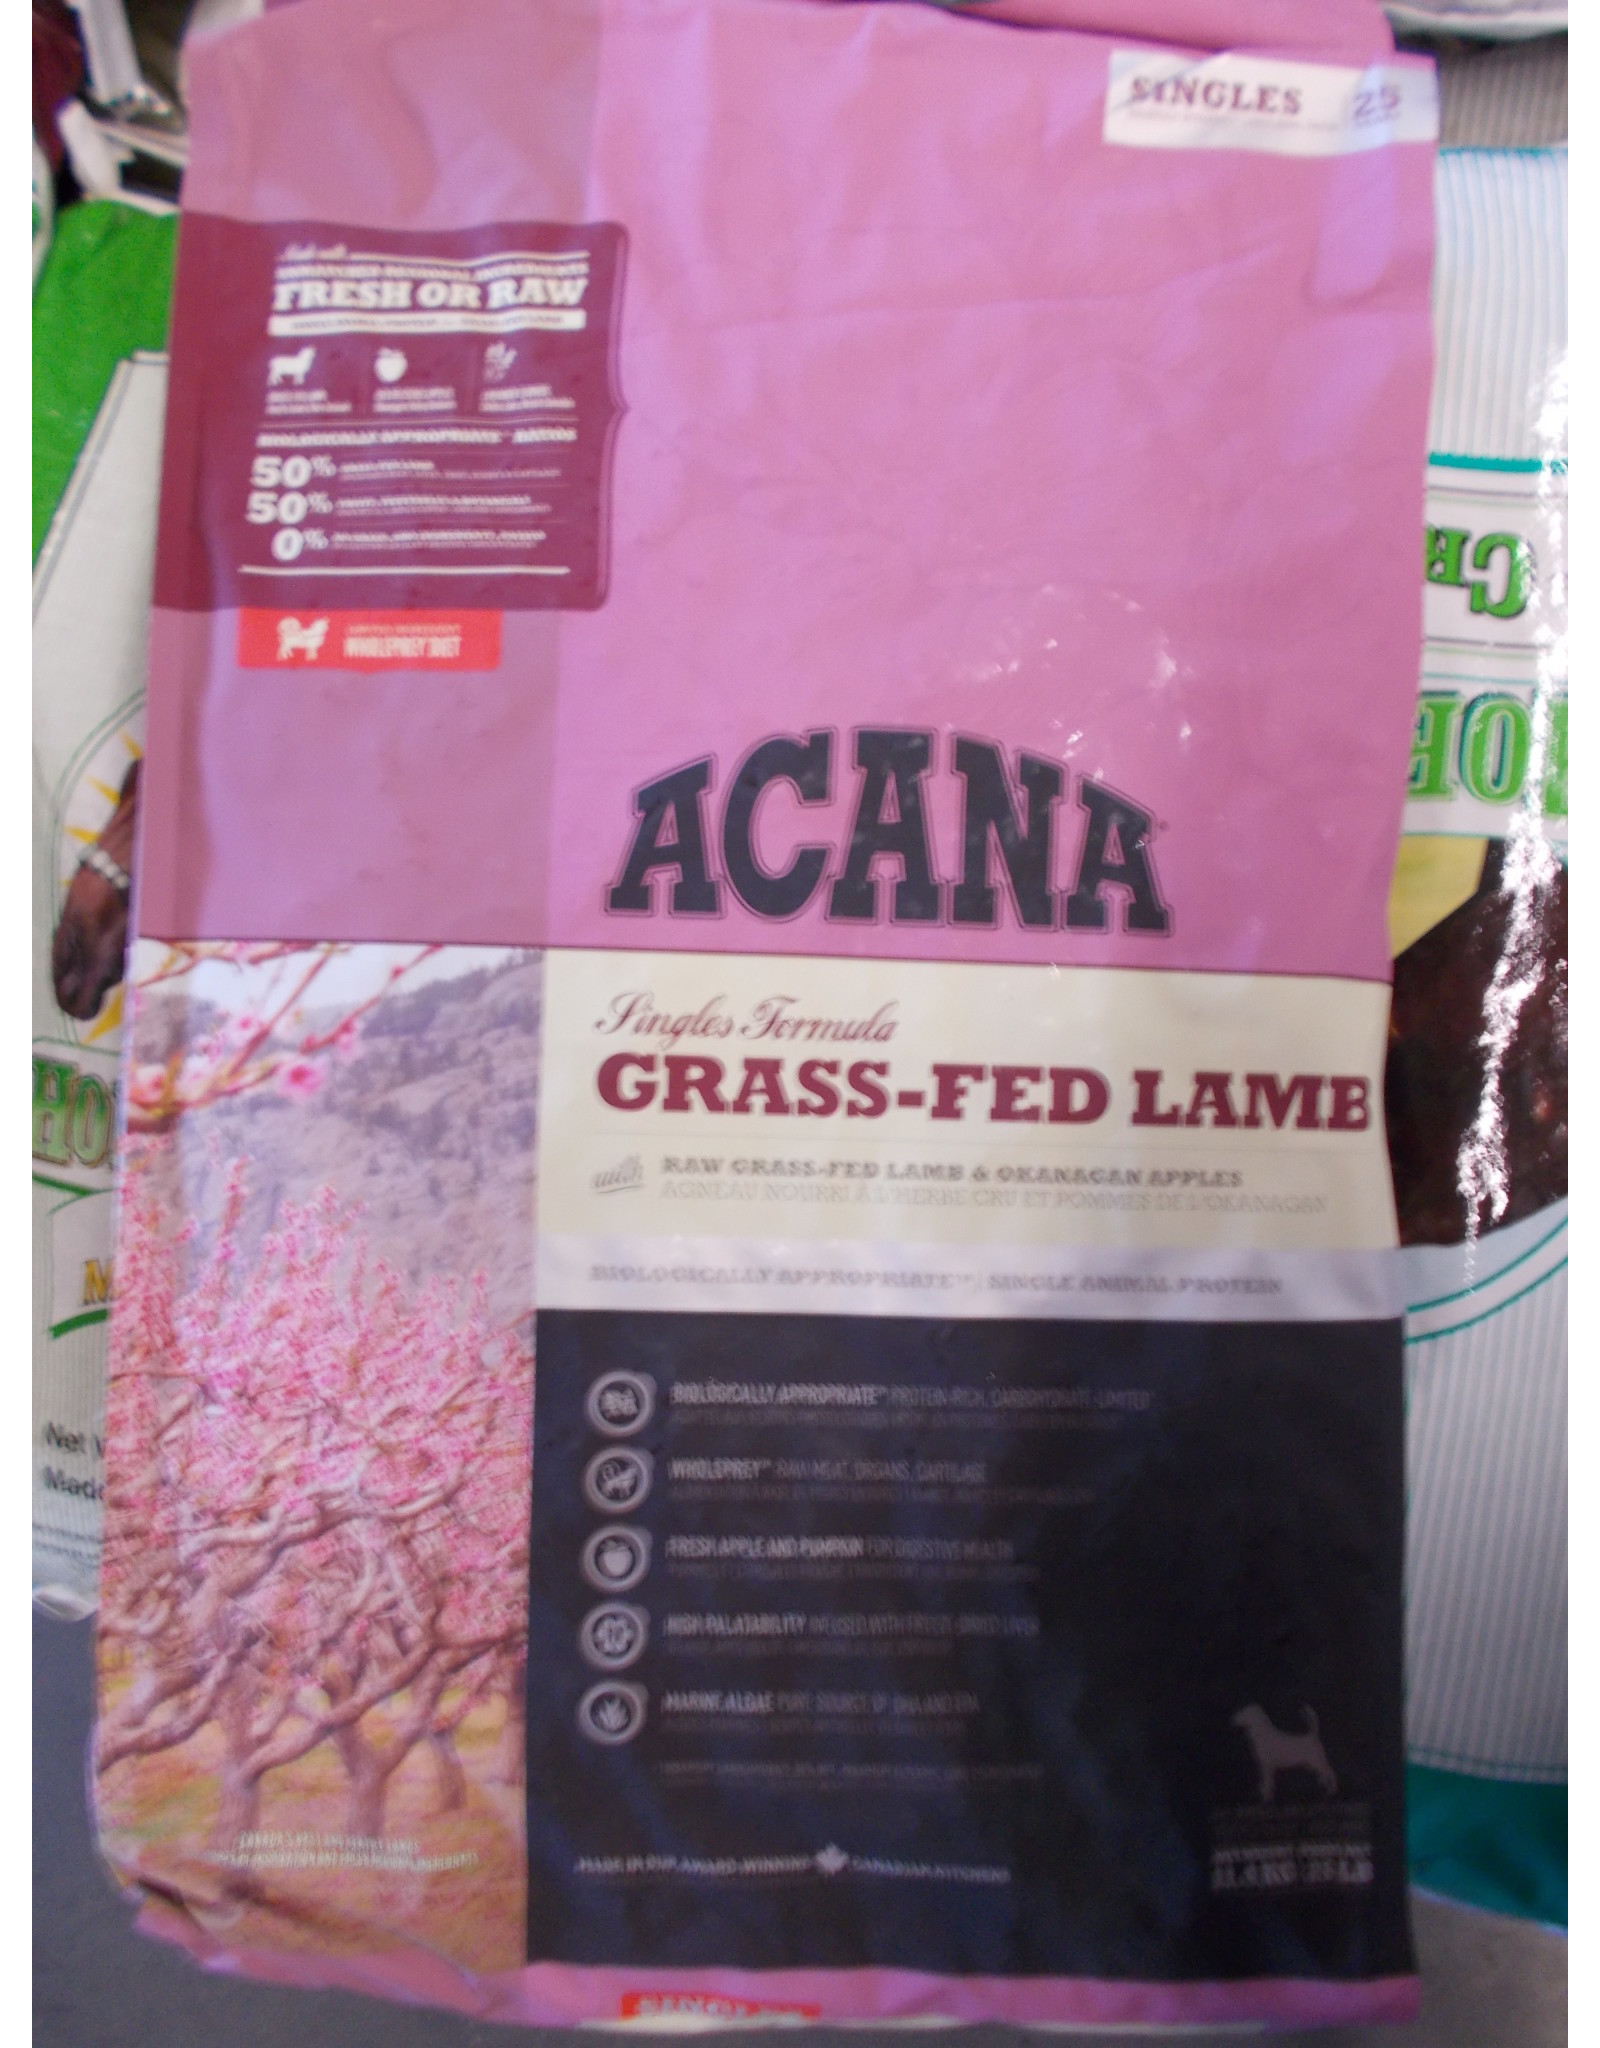 ACANA*GRASS FED LAMB-Lamb and Apples  11.4kg (Bag Pink) All Breeds and Life Stages D401-57012